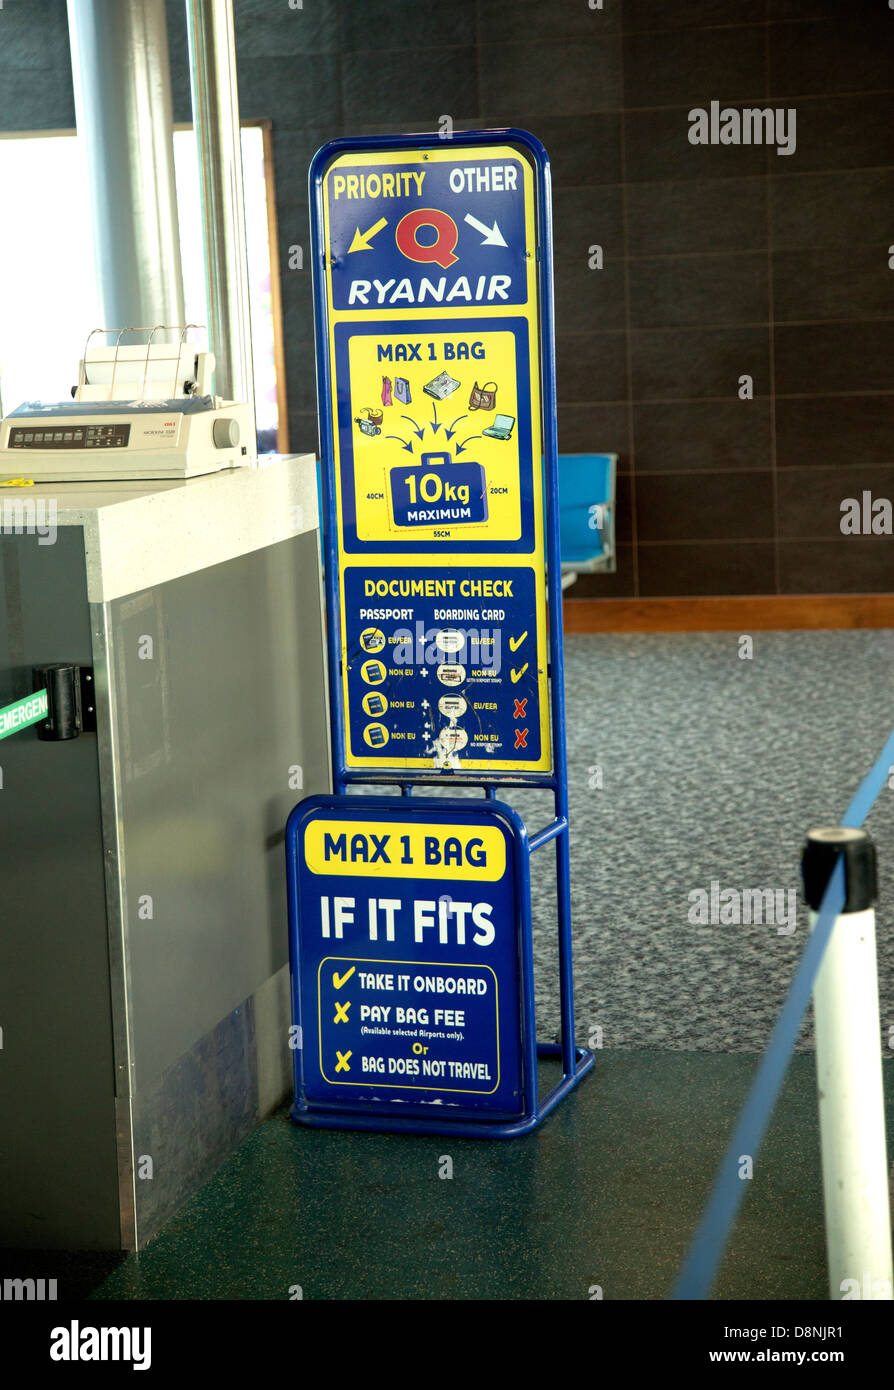 ryanair luggage size restrictions